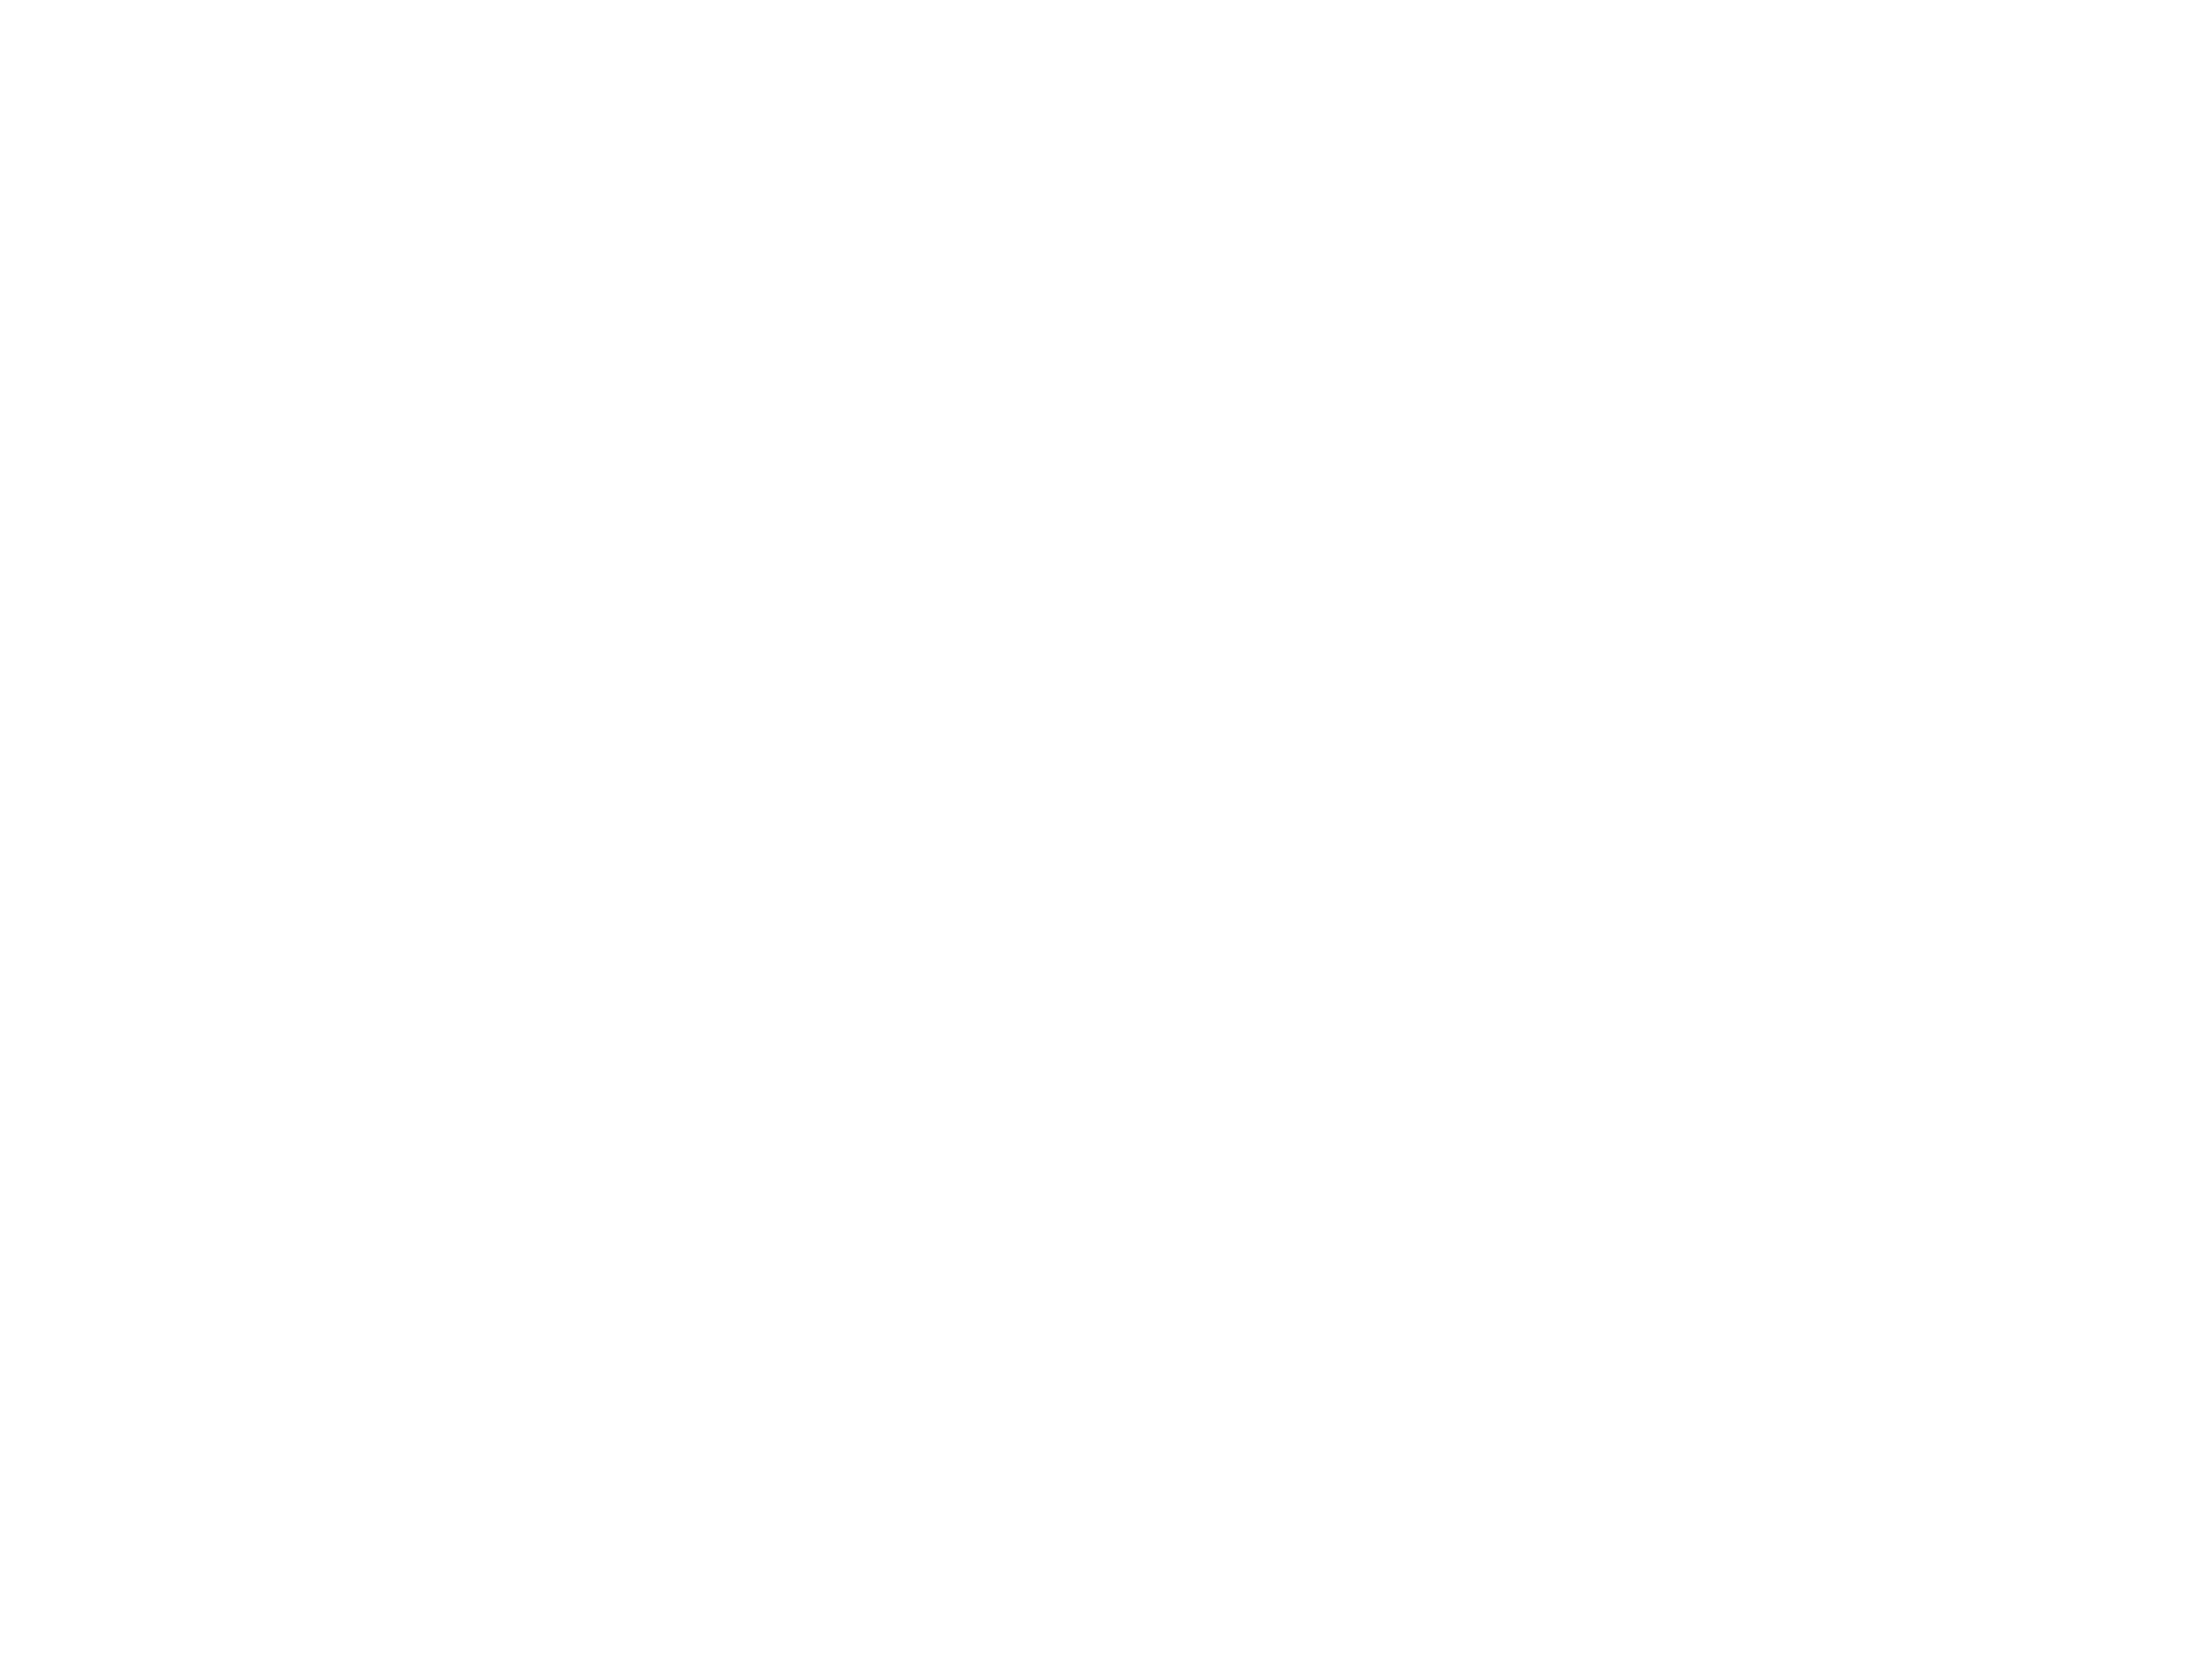 Sketch of Nest of Galaxy carrying strap and case in a simple and geometric shape for transporting smartphones, worn by a person on a bicycle